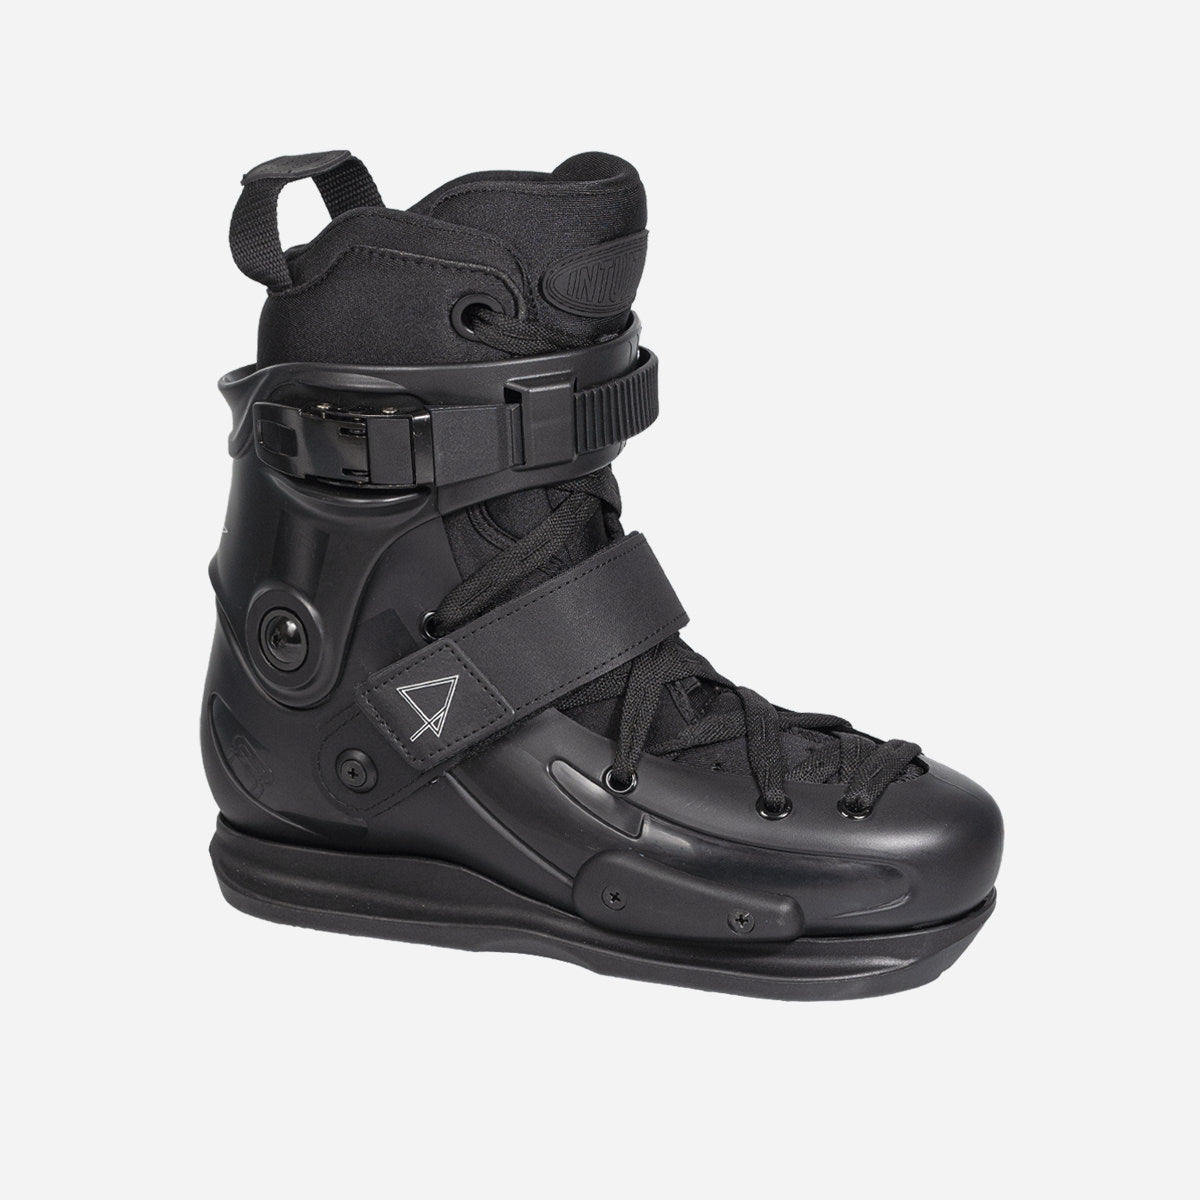 FR Skates - UFR AP Intuition Boot Only